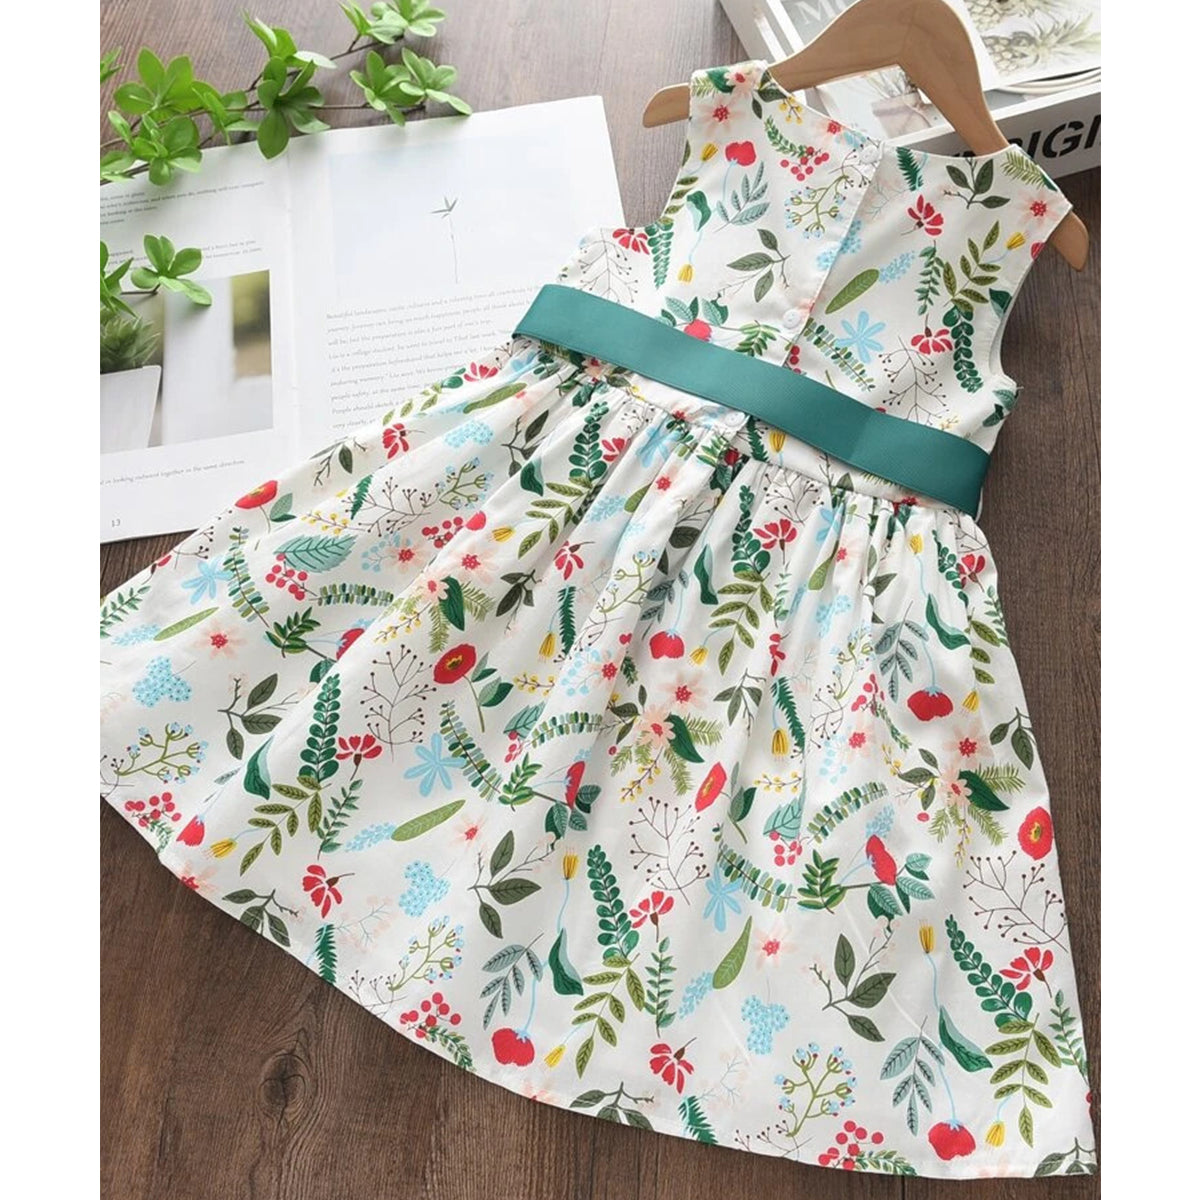 Kids New Fashion Green Floral Frock & Dress for Baby Girls.